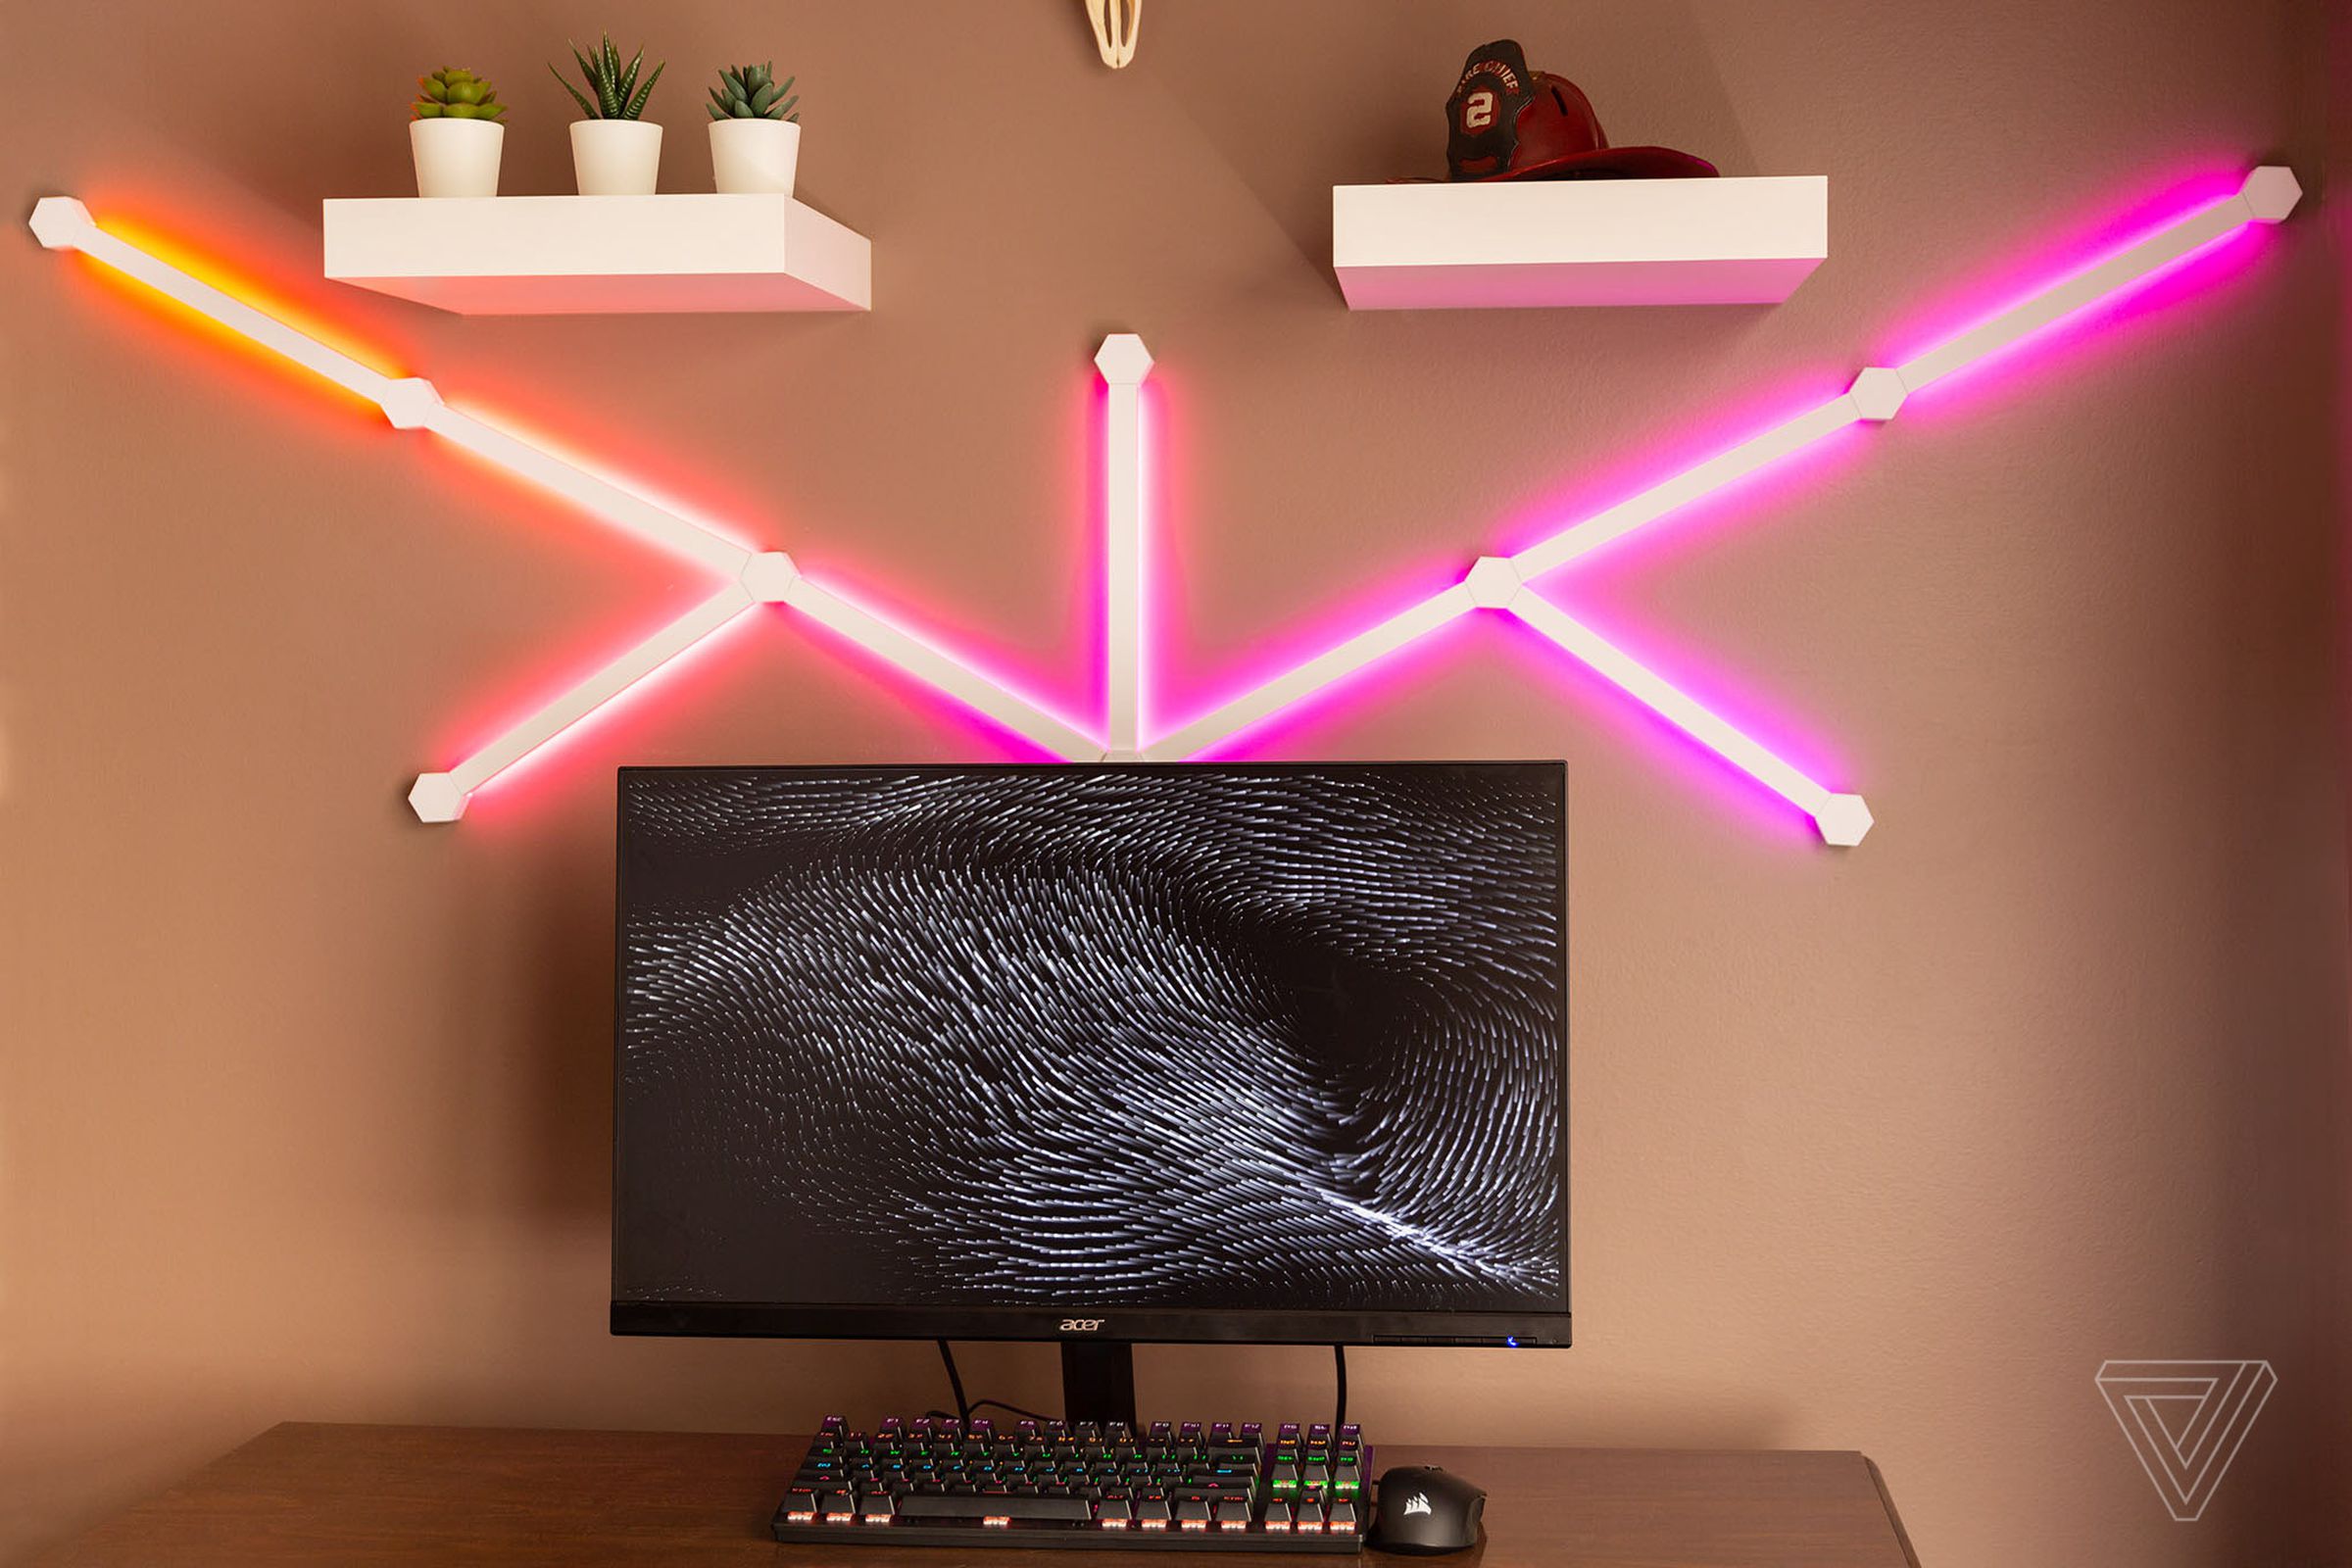 The Nanoleaf Lines modular smart lights give a futuristic vibe to your walls.